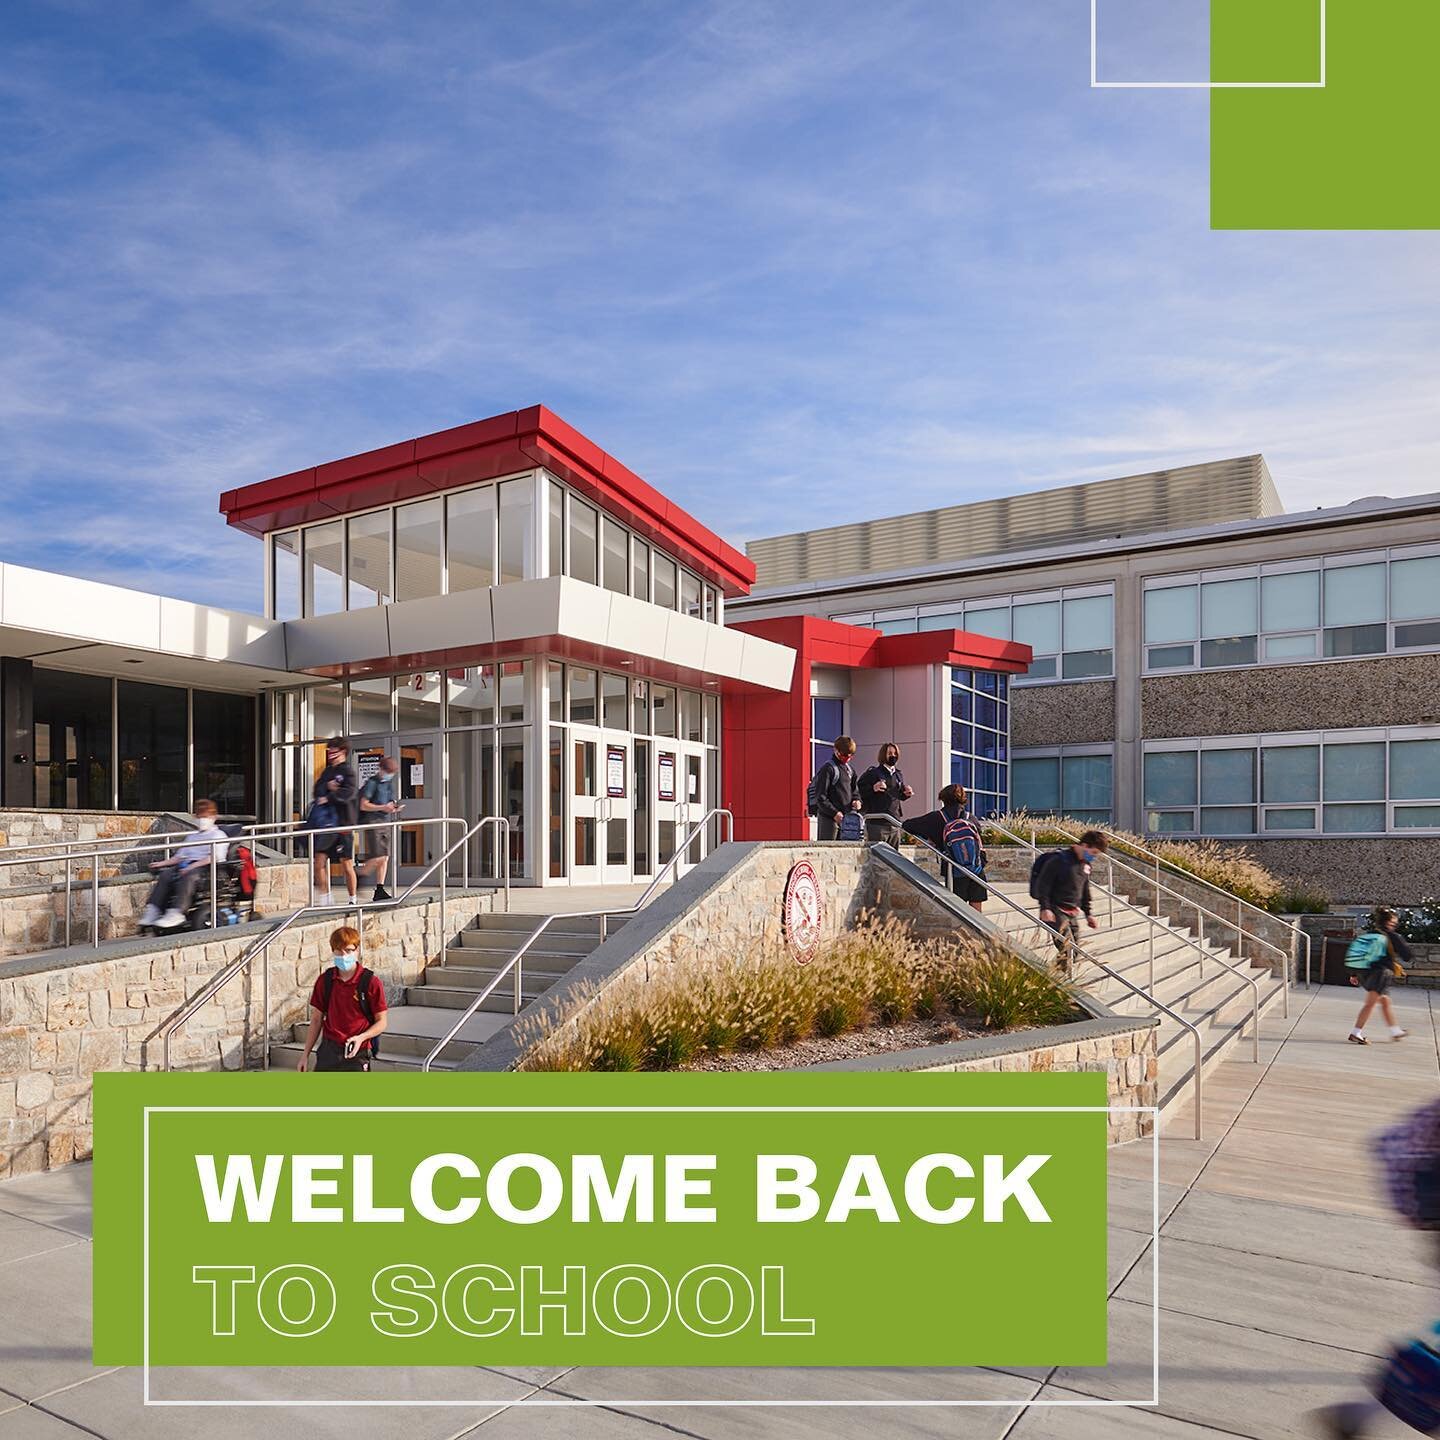 Welcome #backtoschool! We can imagine that this was a long-awaited day for many of our students, teachers, and staff &ndash; the ability to return back to your school buildings and back to in-person classes, activities, sports, and friends. At HESS, 